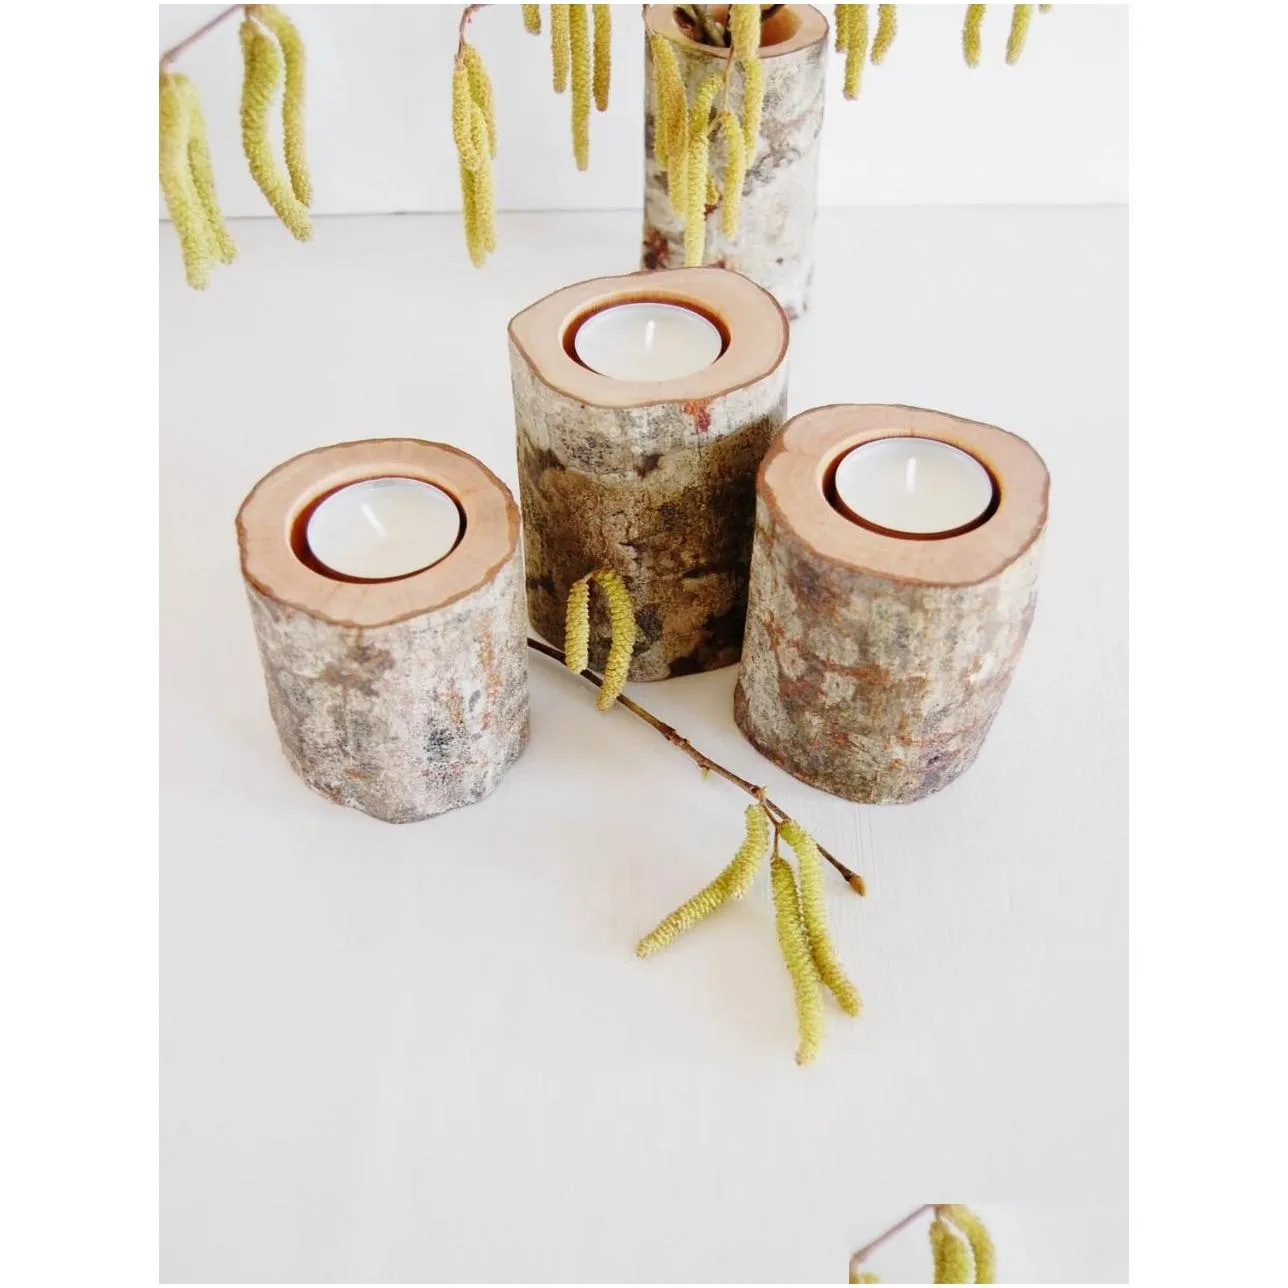 Candle Holders Tree Branch Candleholders Set Of 3 Wooden Tealight Holders Rustic Easter Table Decor Home Drop Delivery Home Garden Hom Ottfa